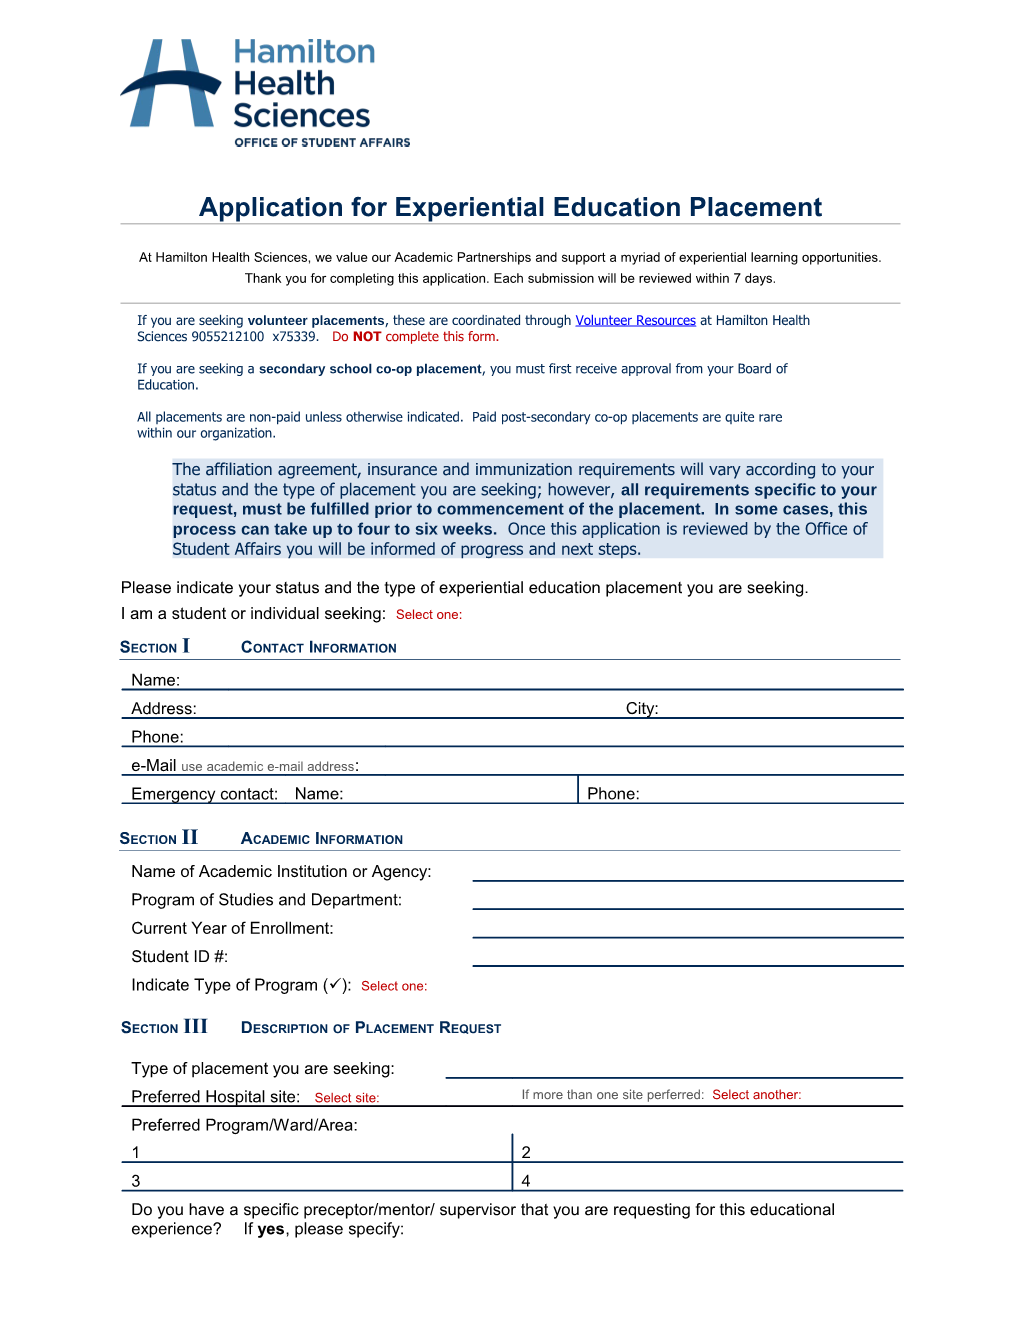 Application for Experiential Education Placement